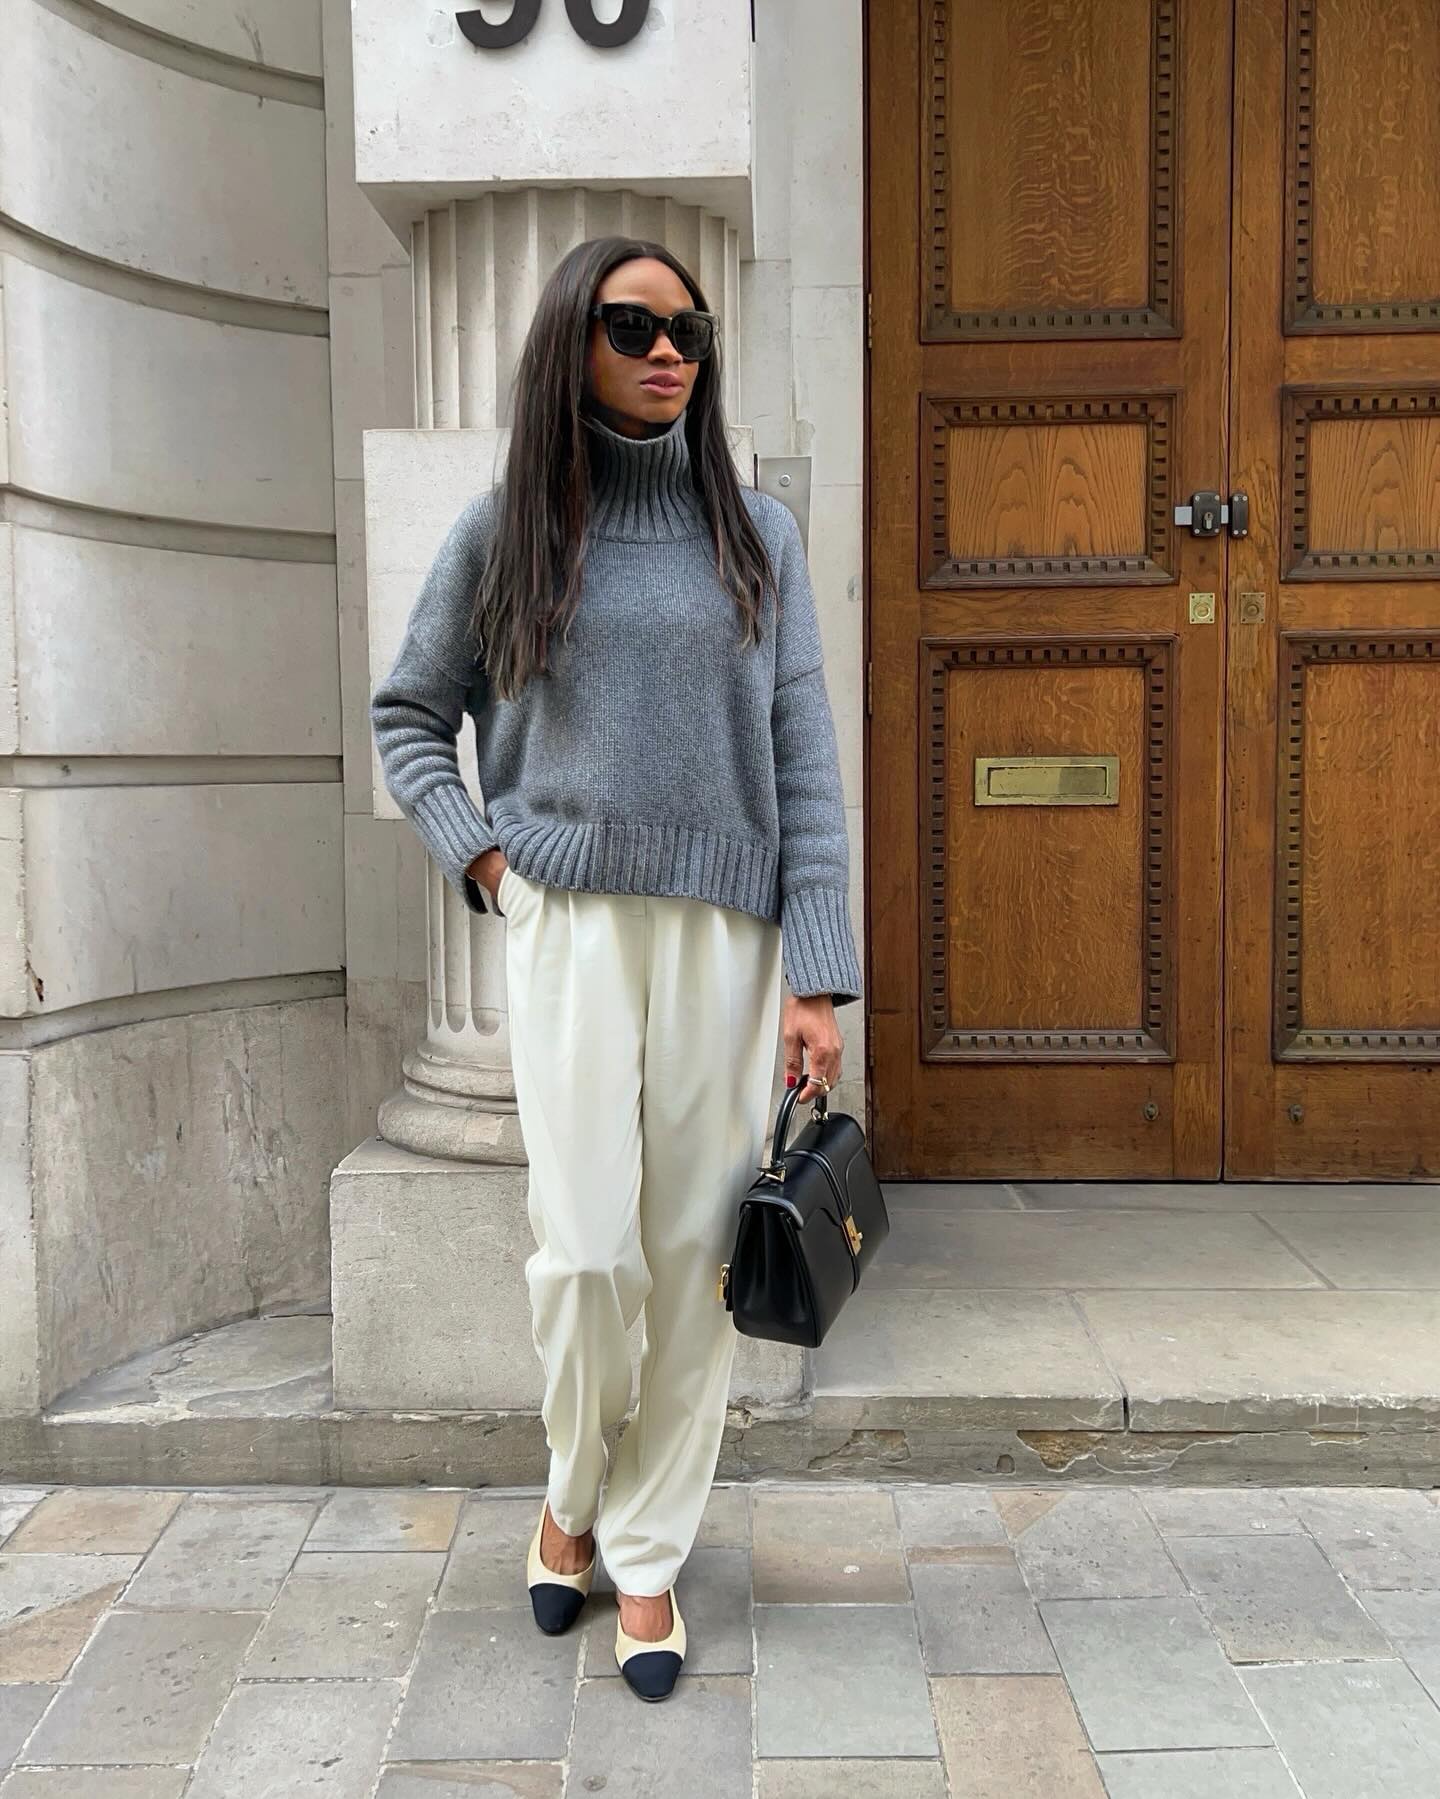 Influencer wears cream trousers with a grey jumper.